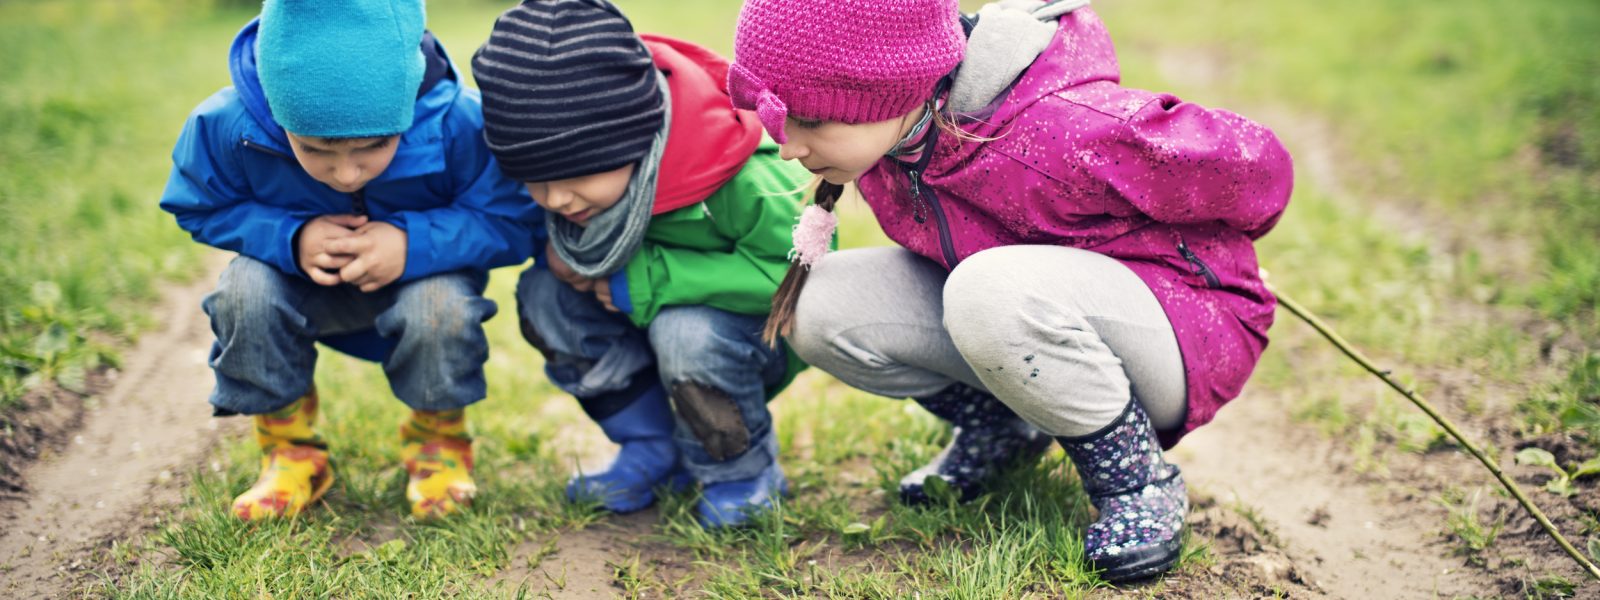 Three kids aged 5 and 8 examining a roman snail in the grass.